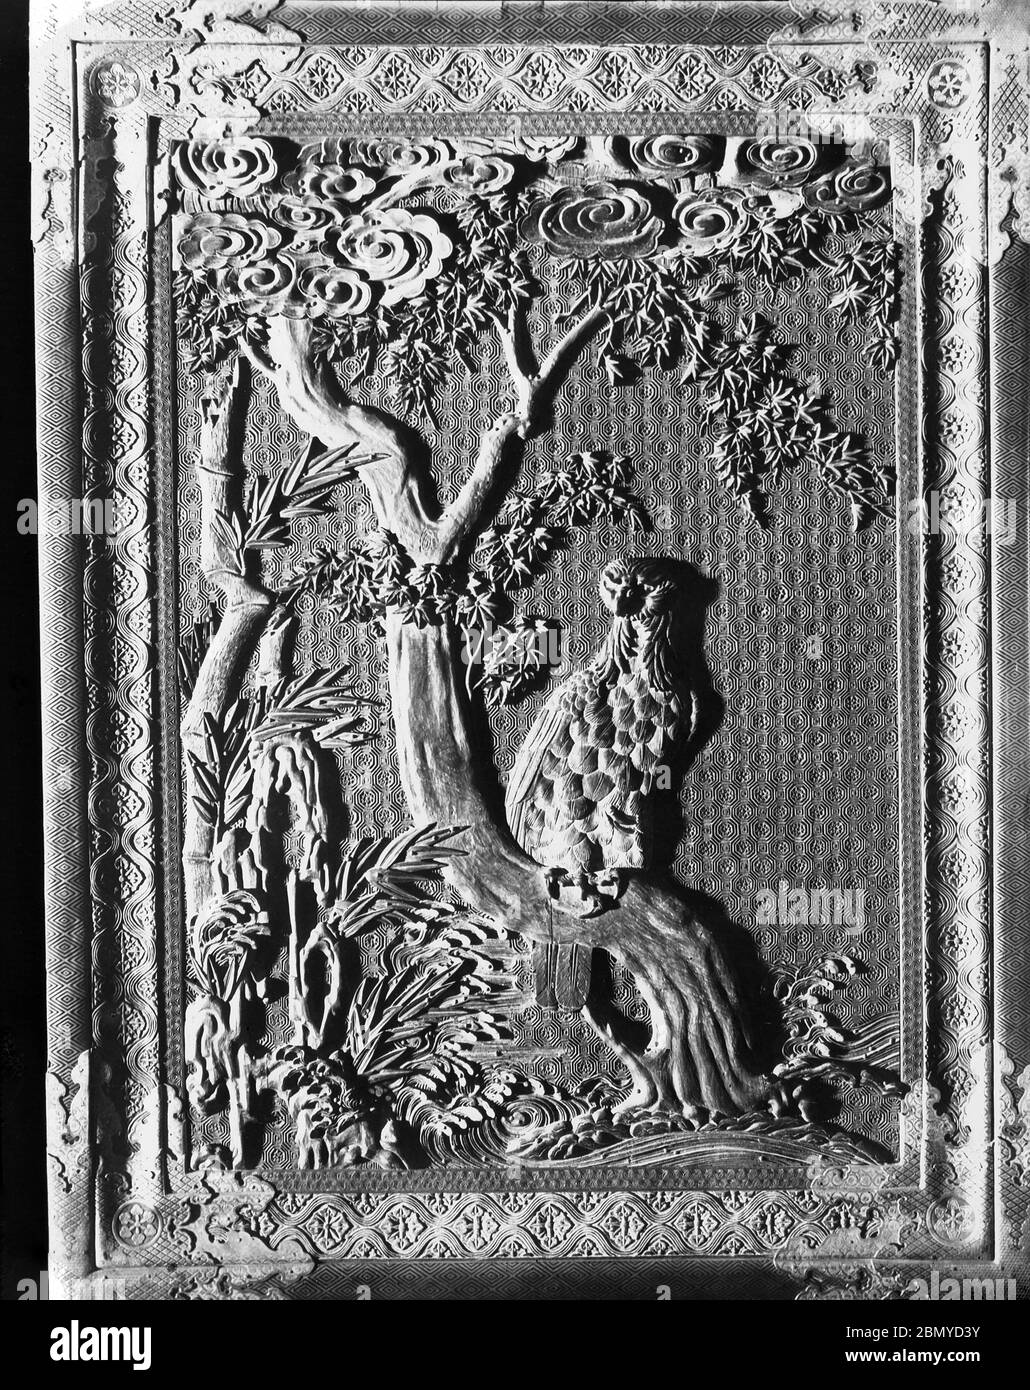 [ 1890s Japan - Japanese Wood Carving ] —   Wood carving at Nikko, Tochigi Prefecture.  From a series of glass slides published (but not photographed) by Scottish photographer George Washington Wilson (1823–1893). Wilson’s firm was one of the largest publishers of photographic prints in the world.  19th century vintage glass slide. Stock Photo